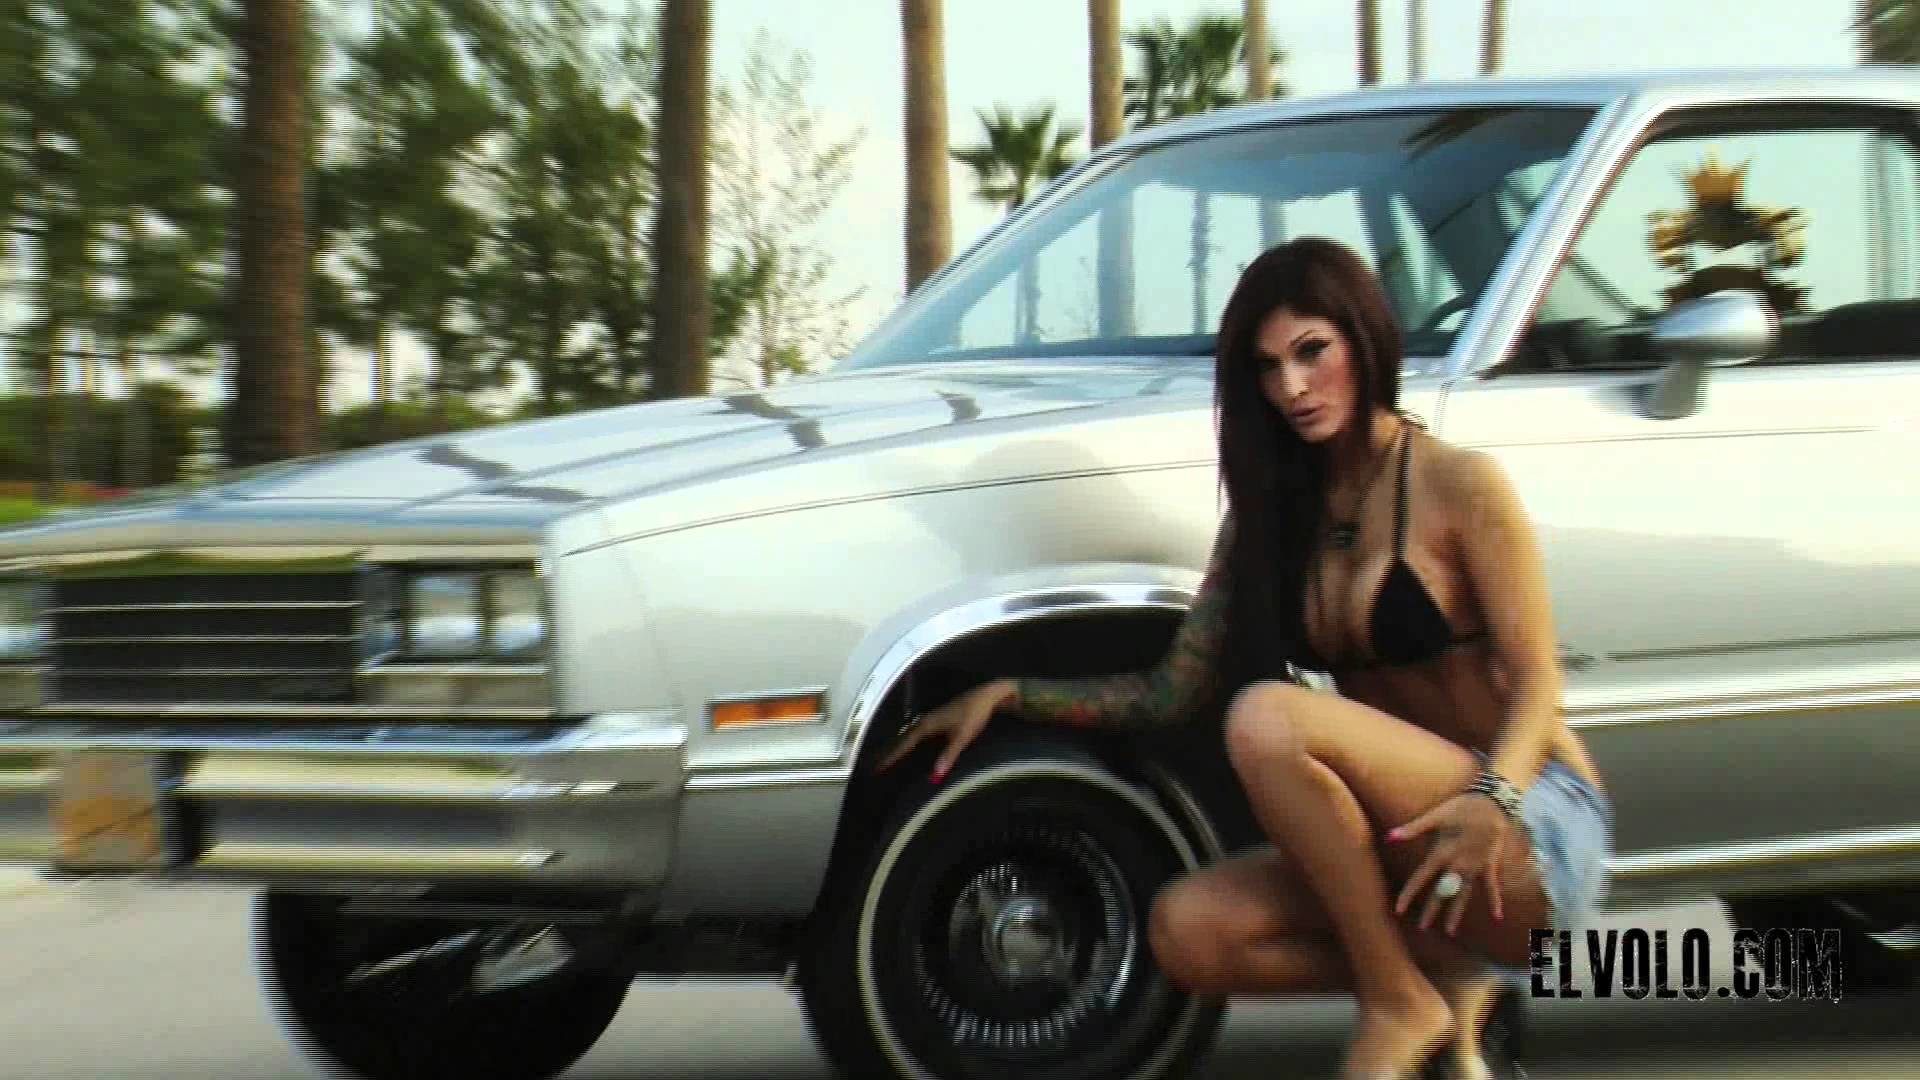 1920x1080 Behind the Scenes at Volo's Lowrider Photo Shoot w/ Queen Esther - YouTube